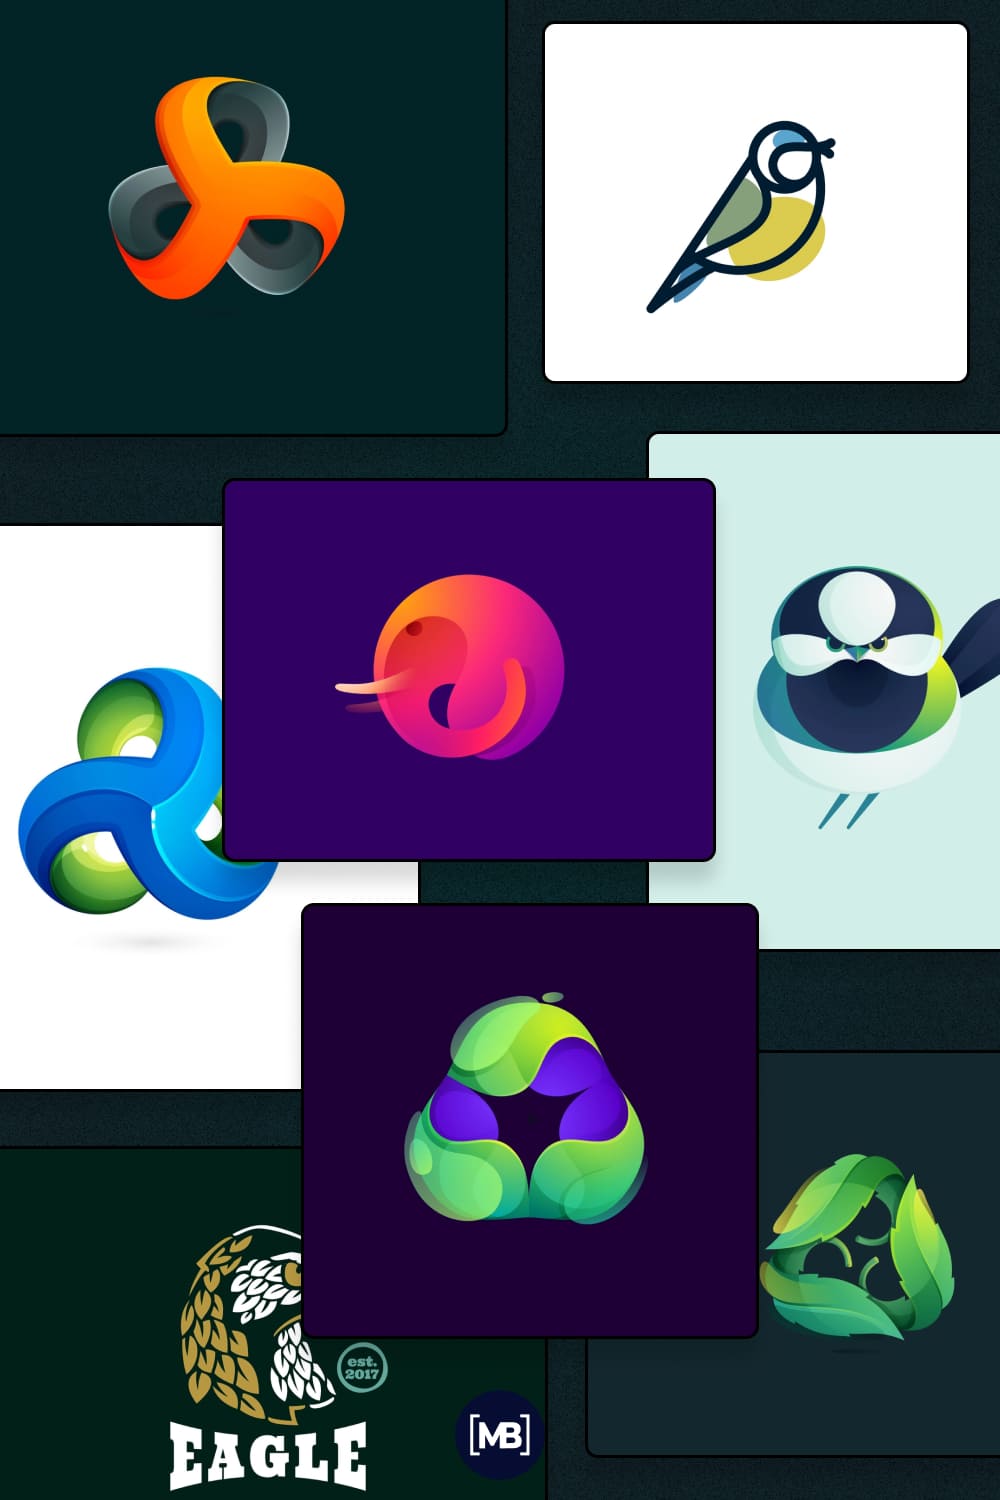 Slightly futuristic options for logos in the form of a sphere and birds.